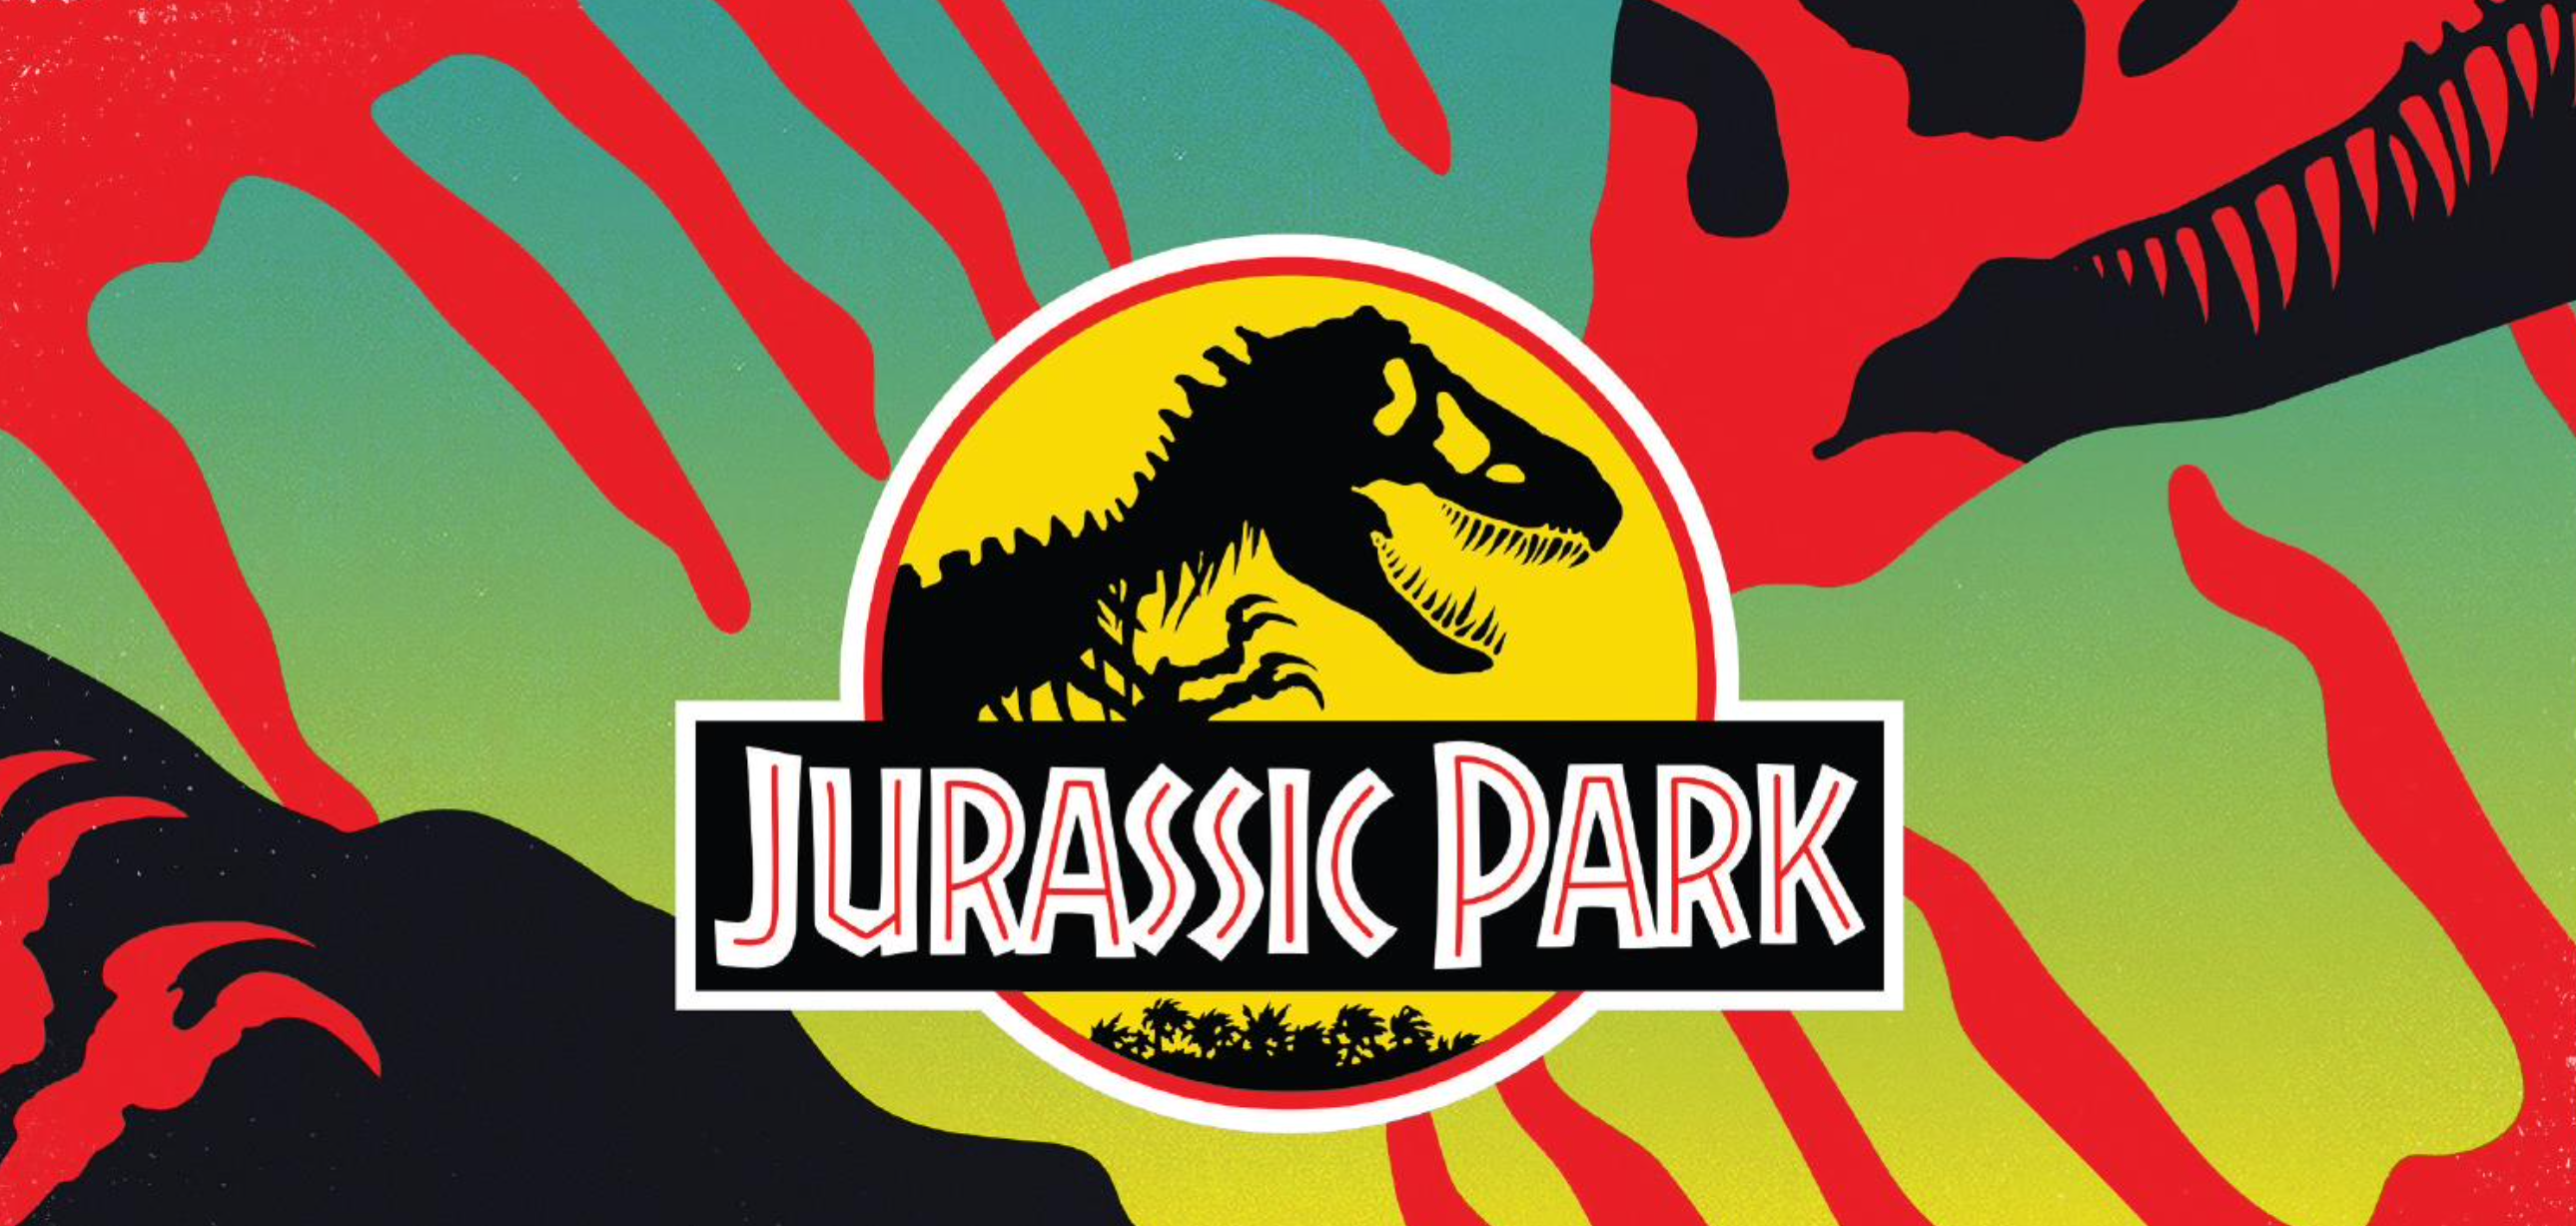 Jurassic Park X Smiggle – A Collection 65 Million Years in the Making